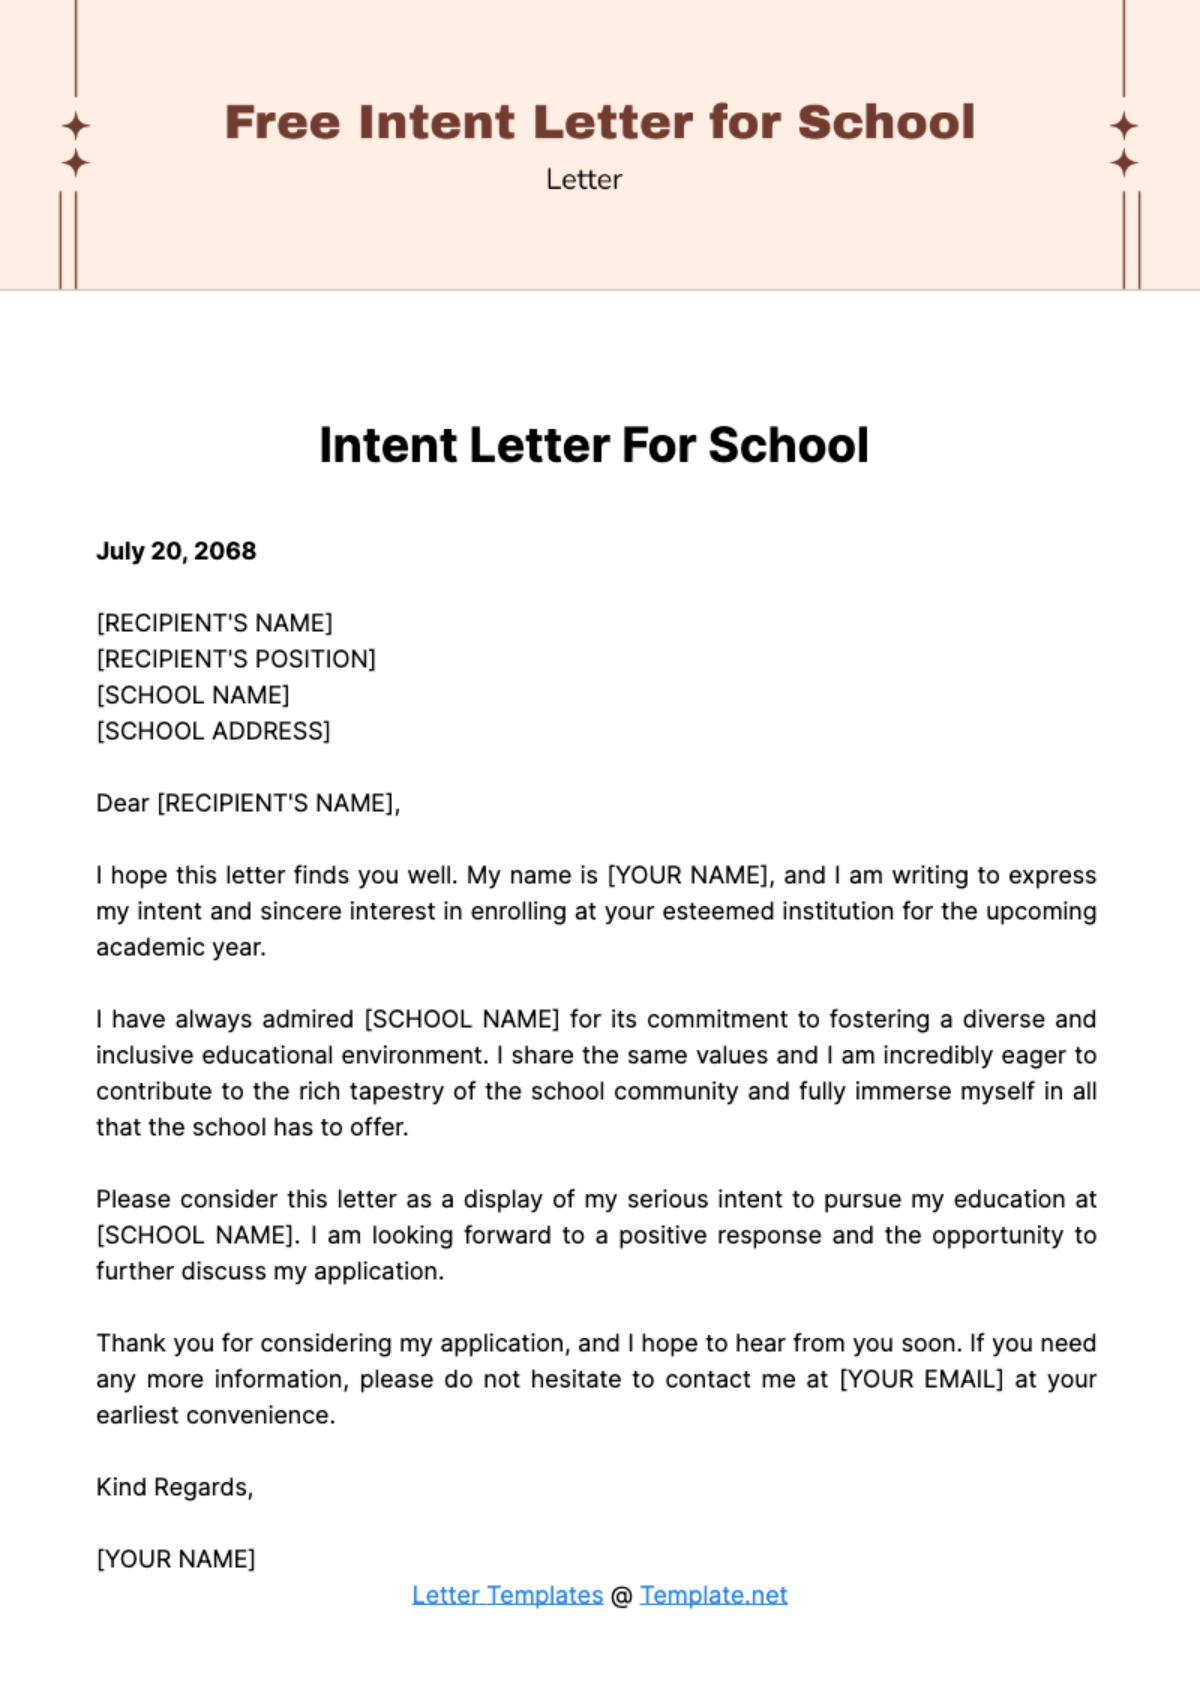 Intent Letter for School Template